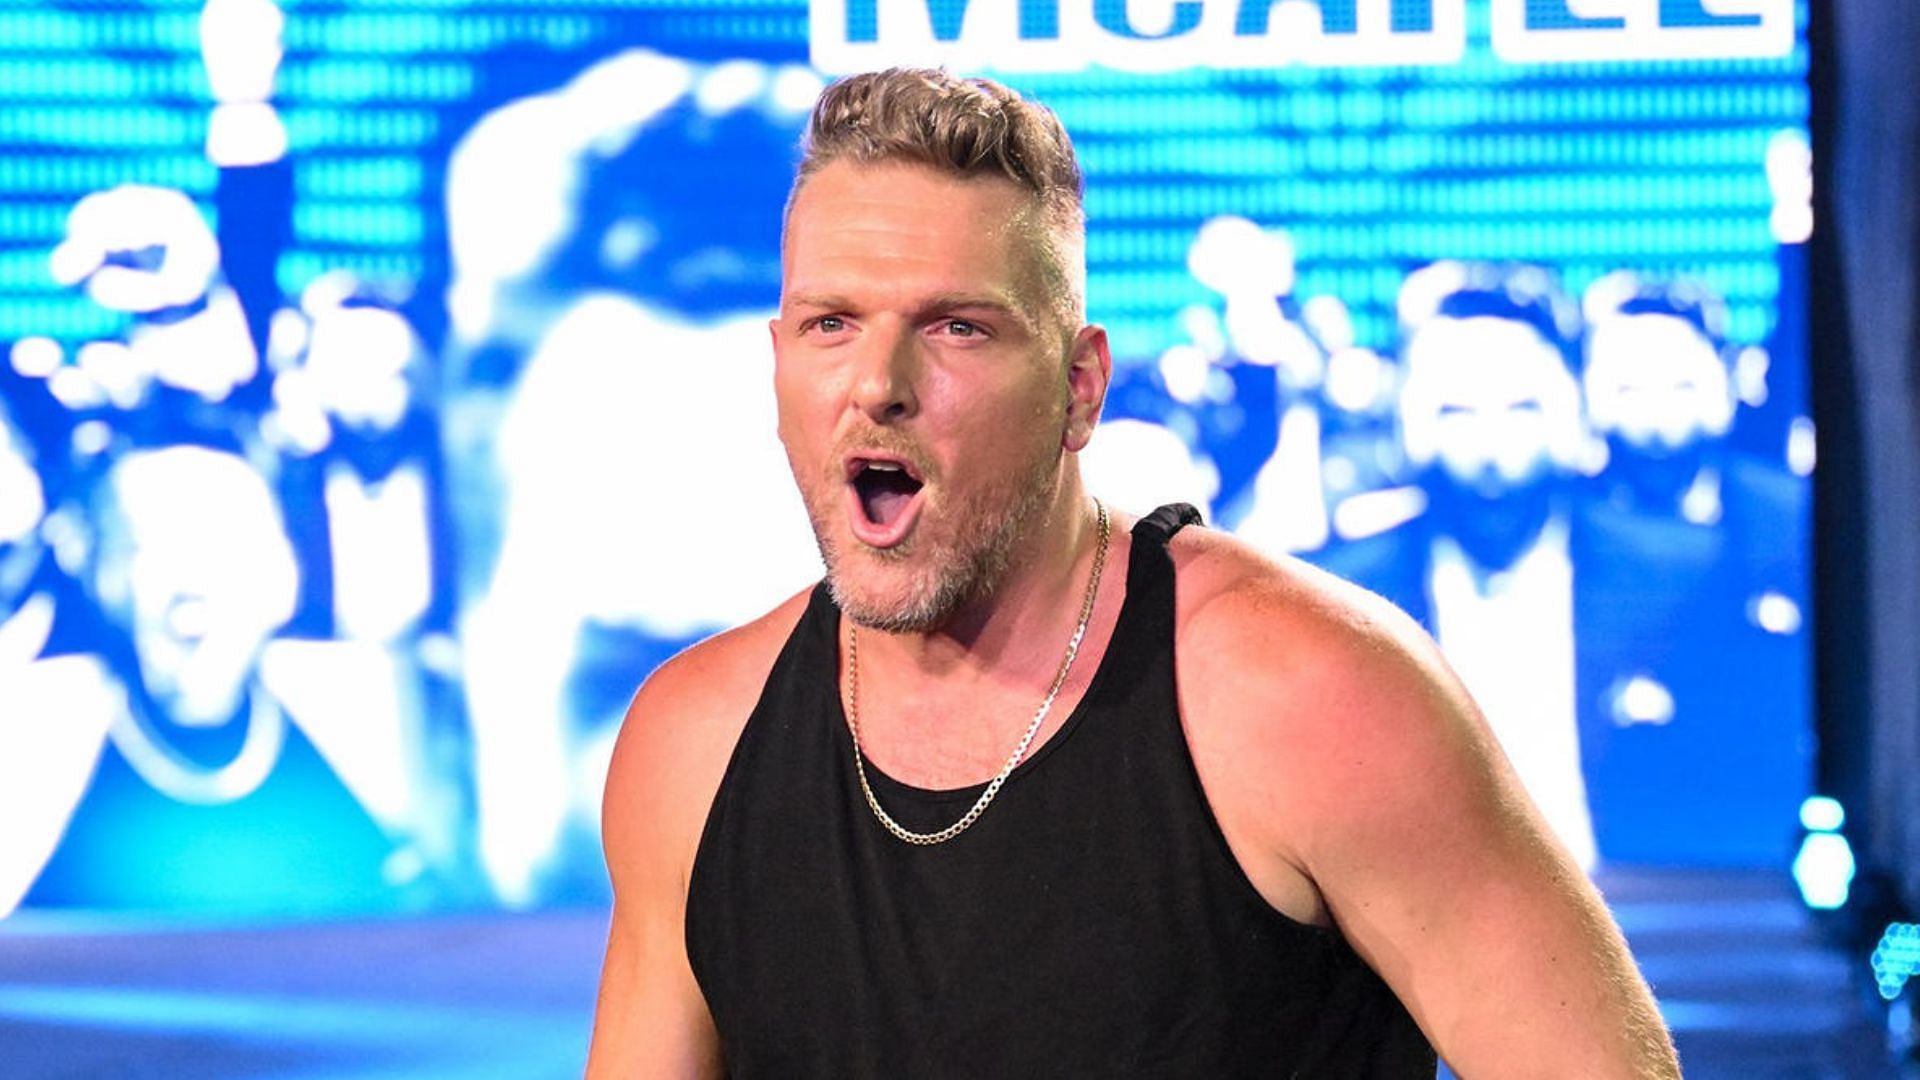 Pat McAfee also competed at WrestleMania and SummerSlam!